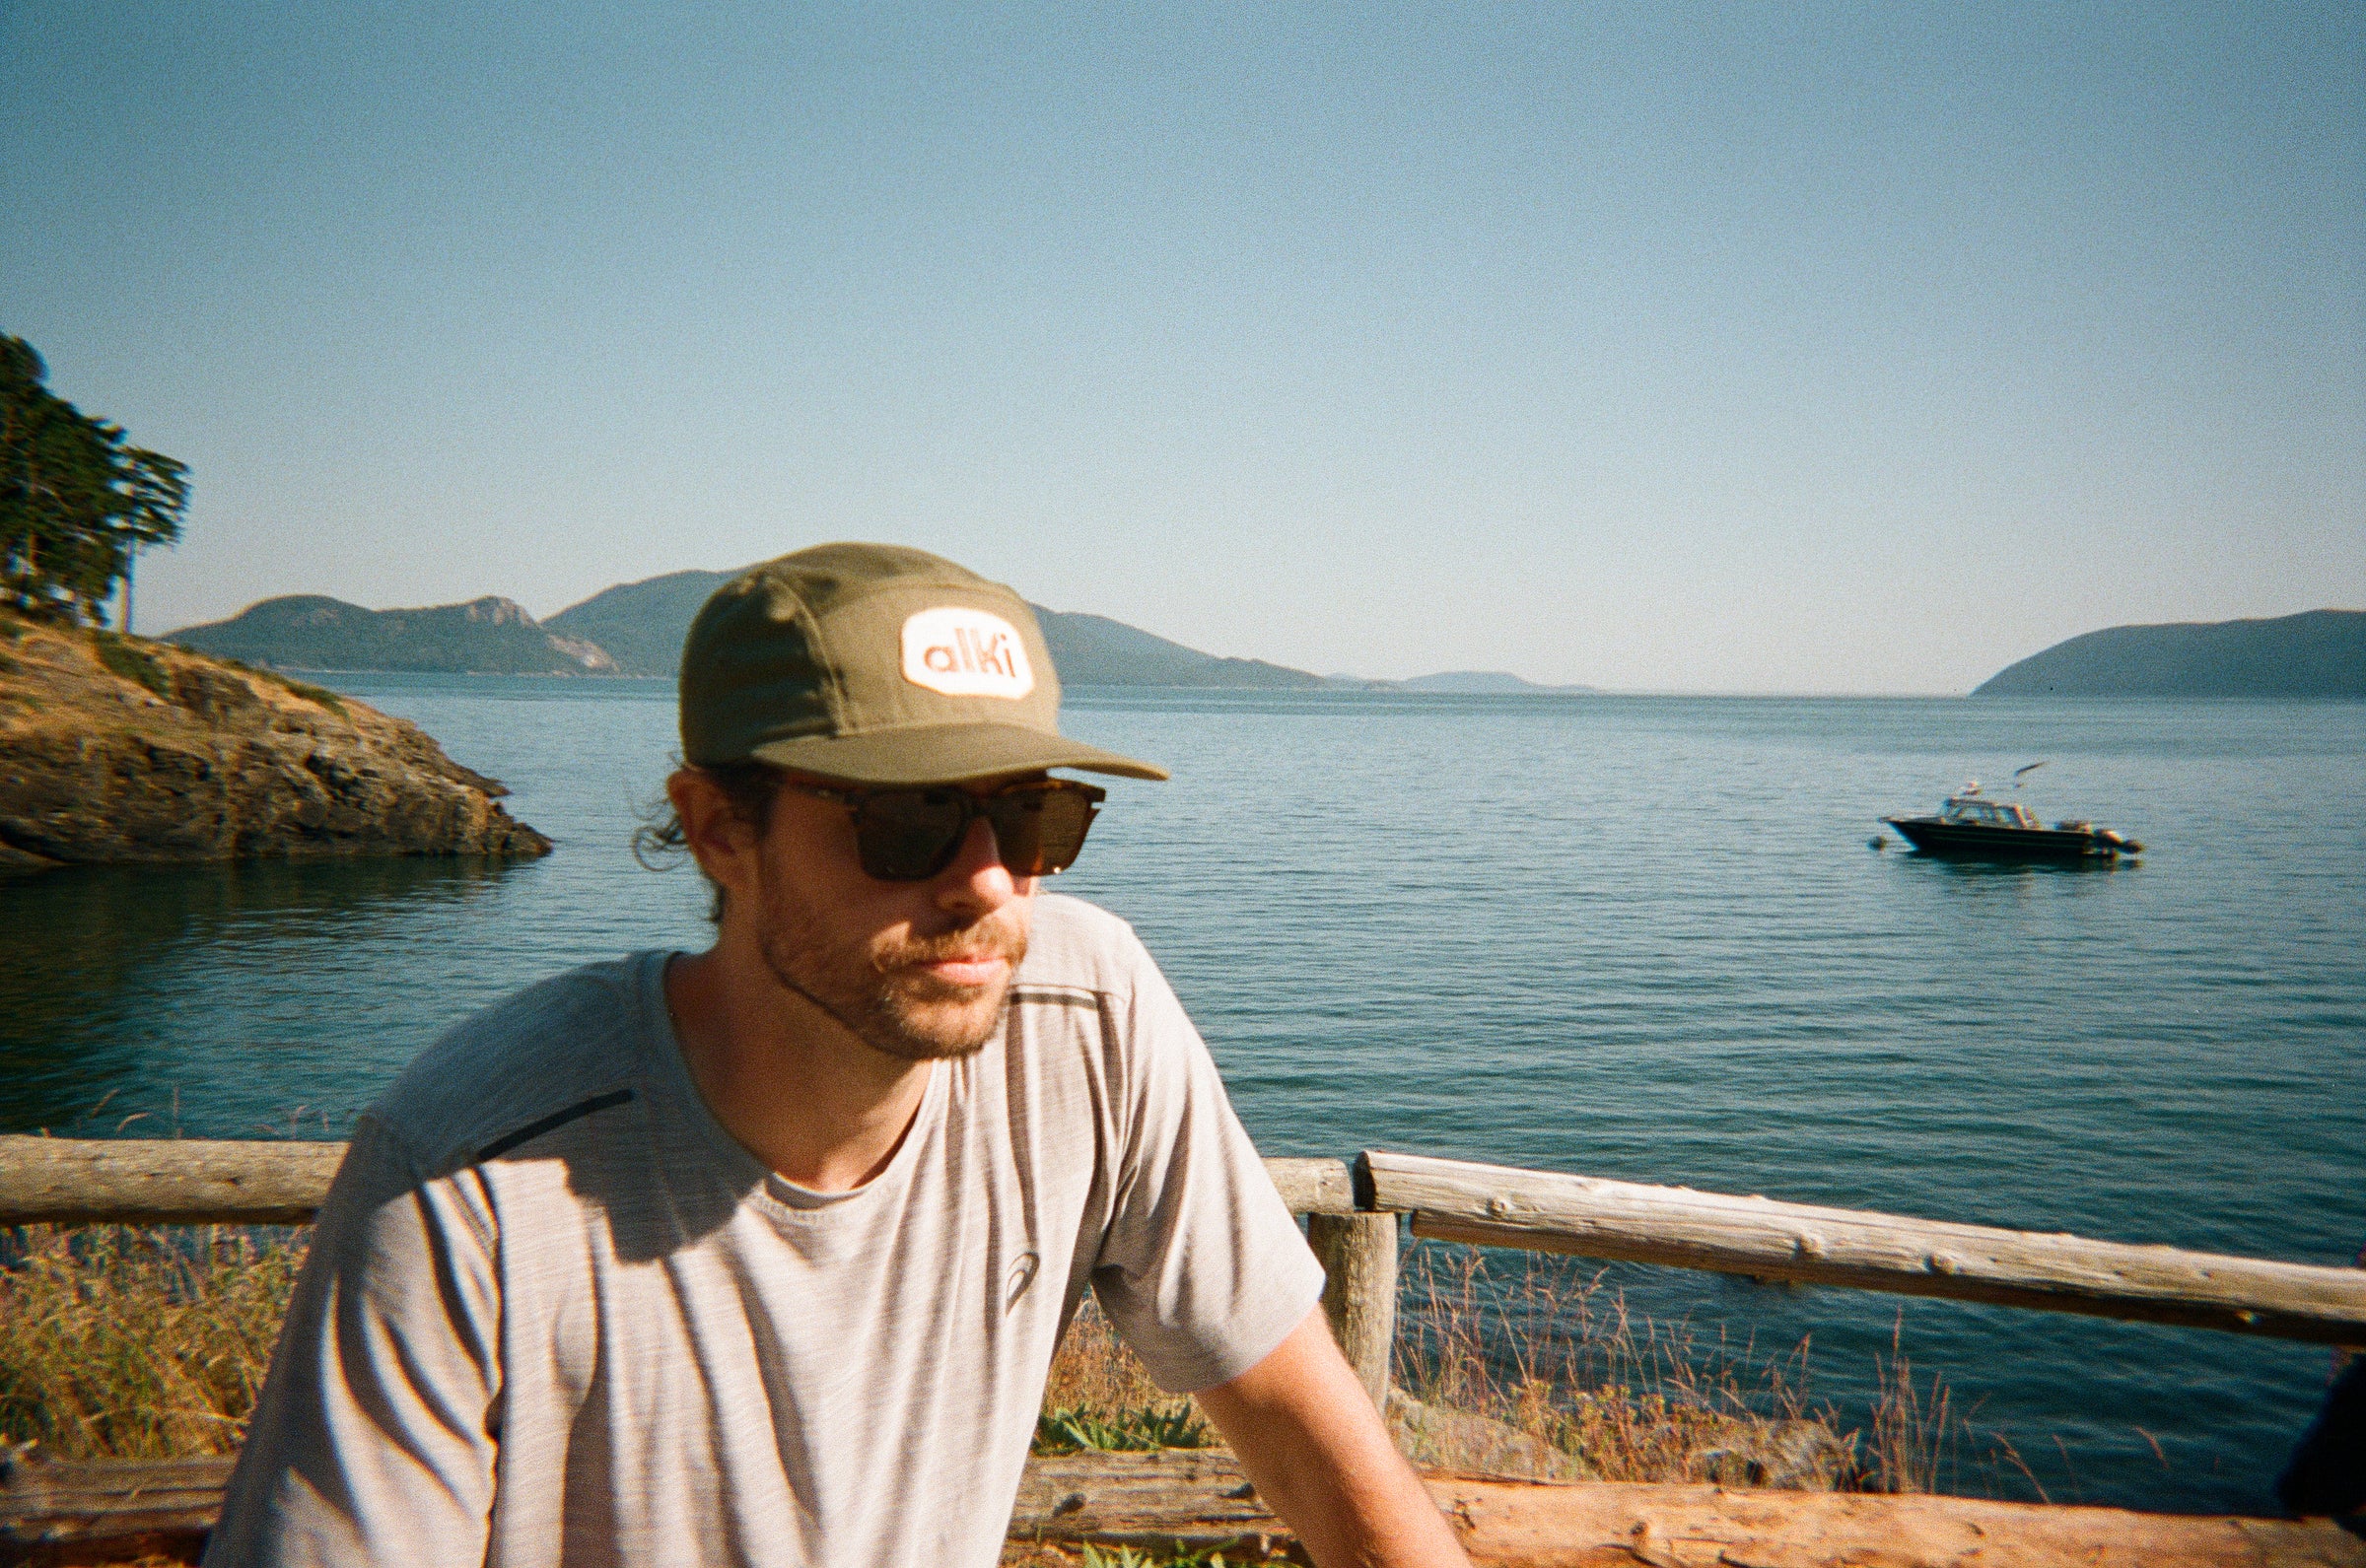 posing with my Alki Supply hat at Doe Bay on Orcas Island